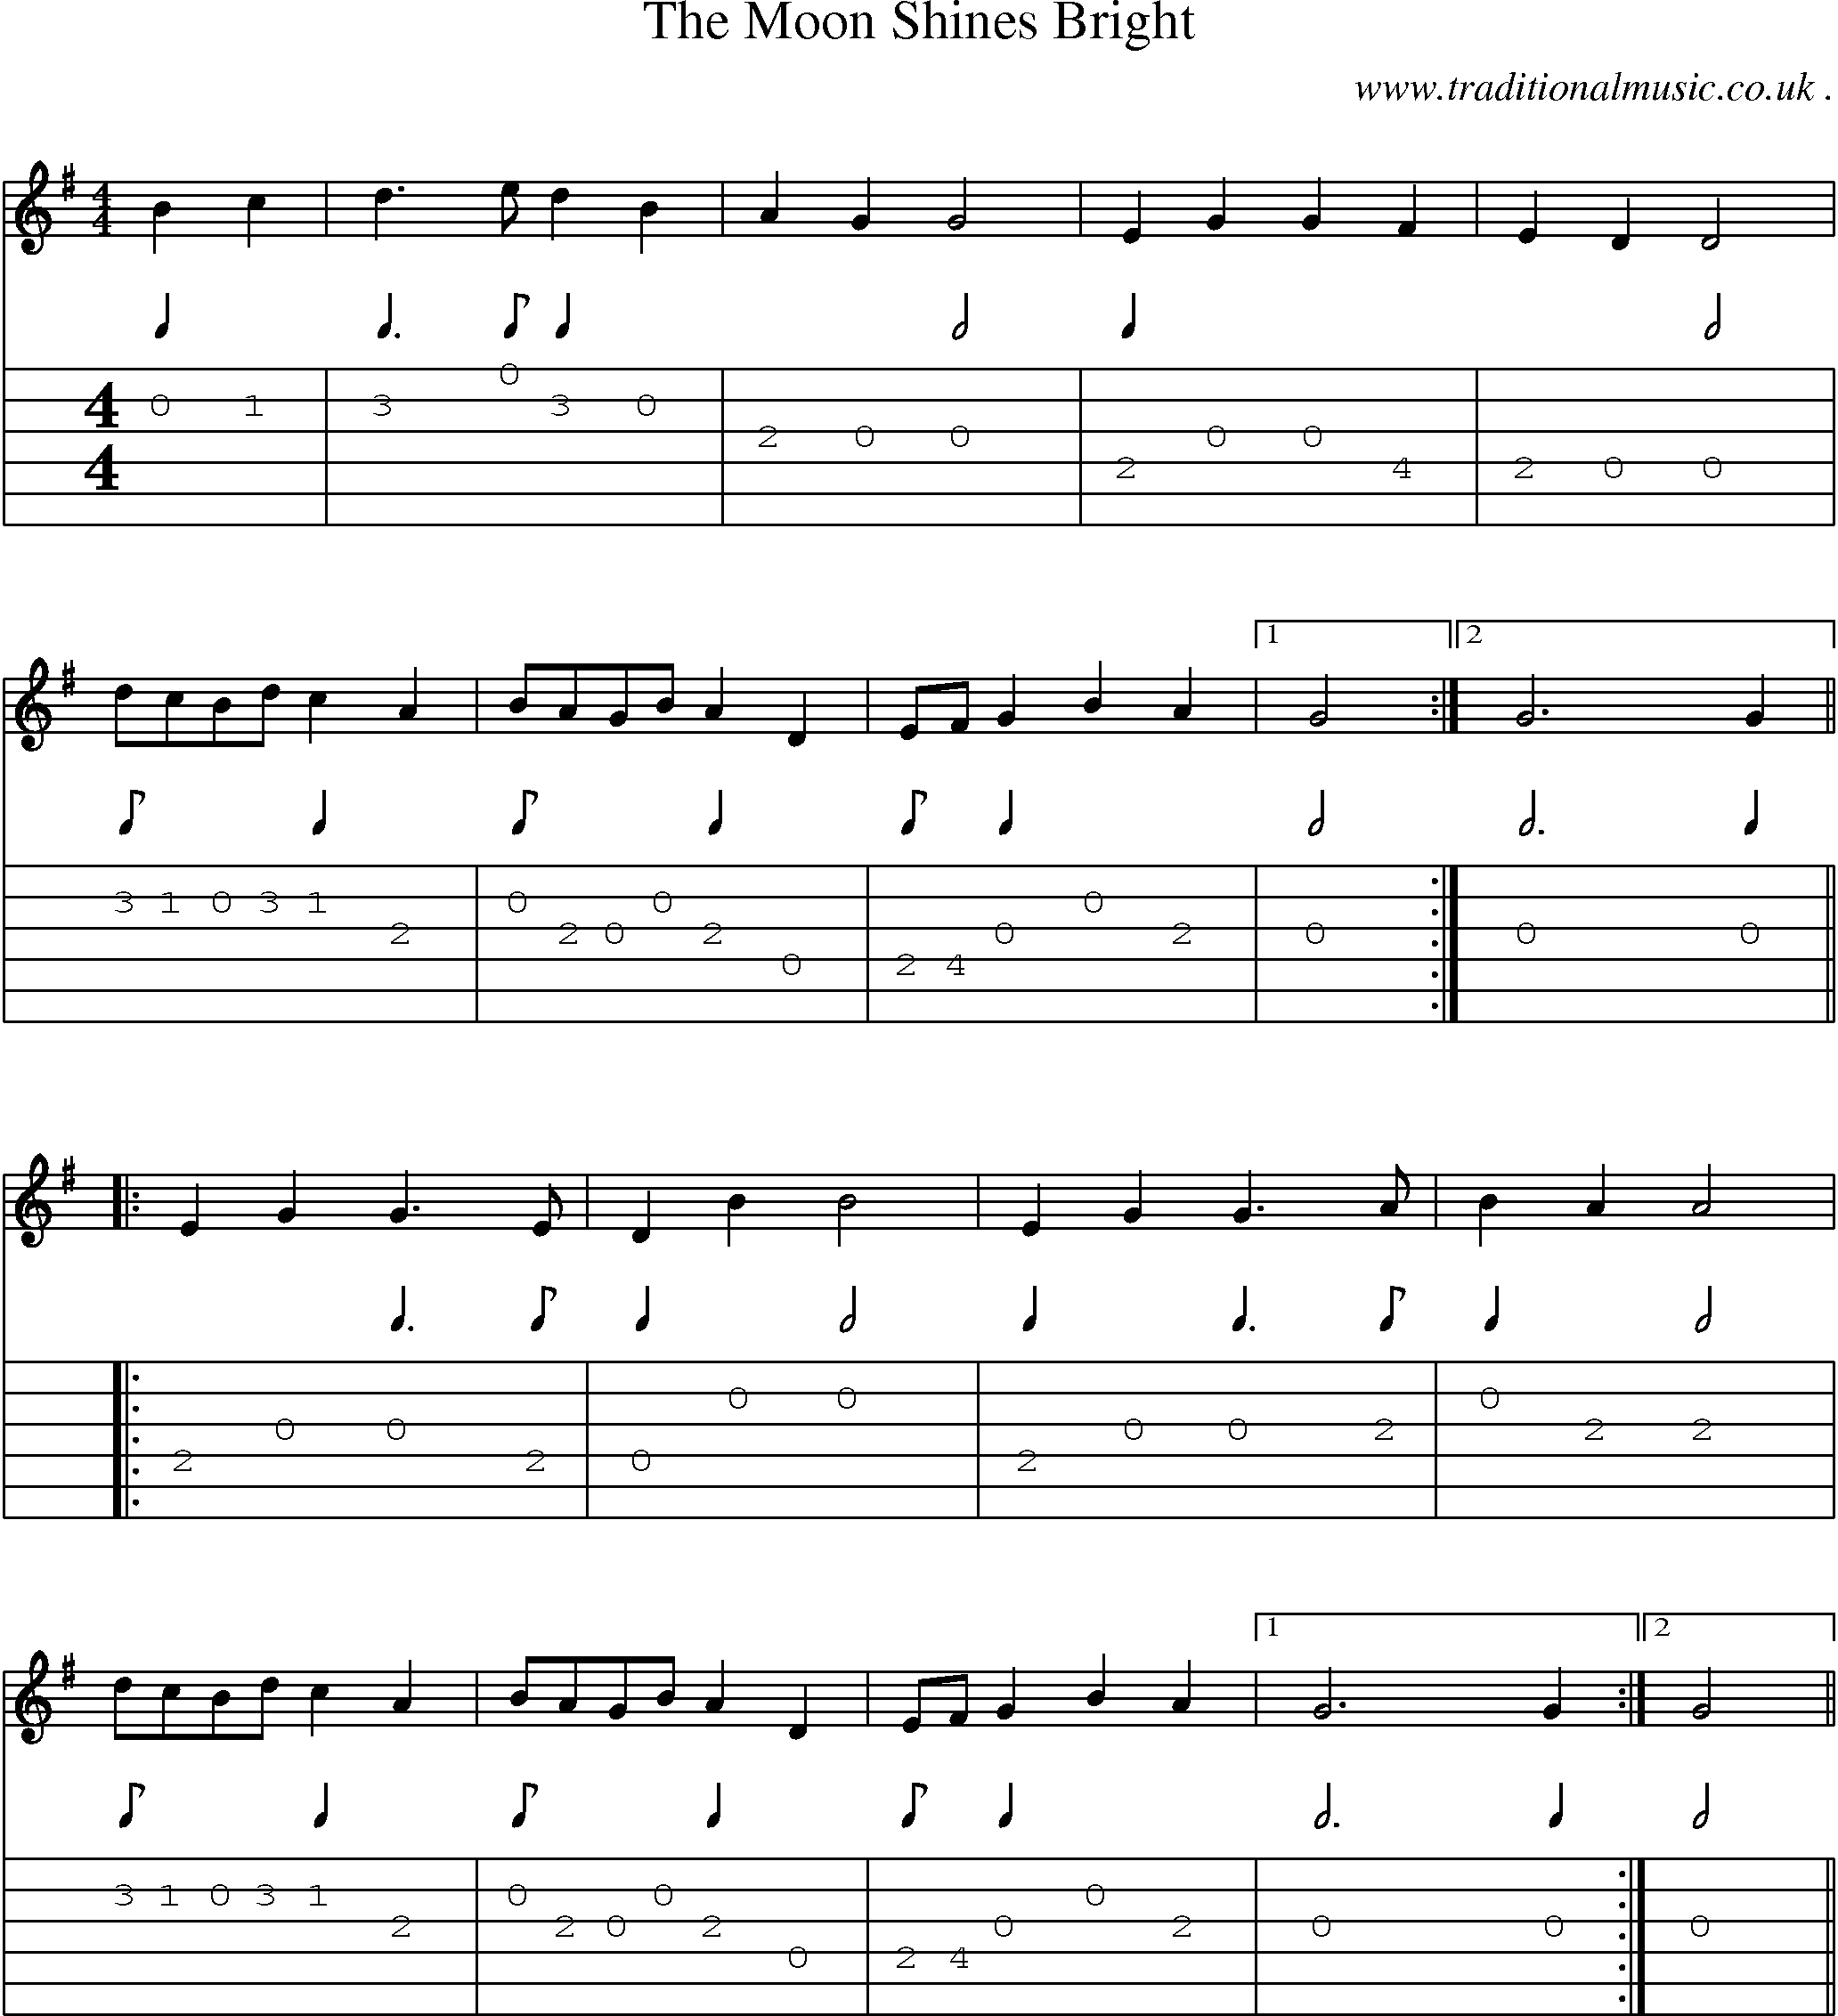 Sheet-Music and Guitar Tabs for The Moon Shines Bright